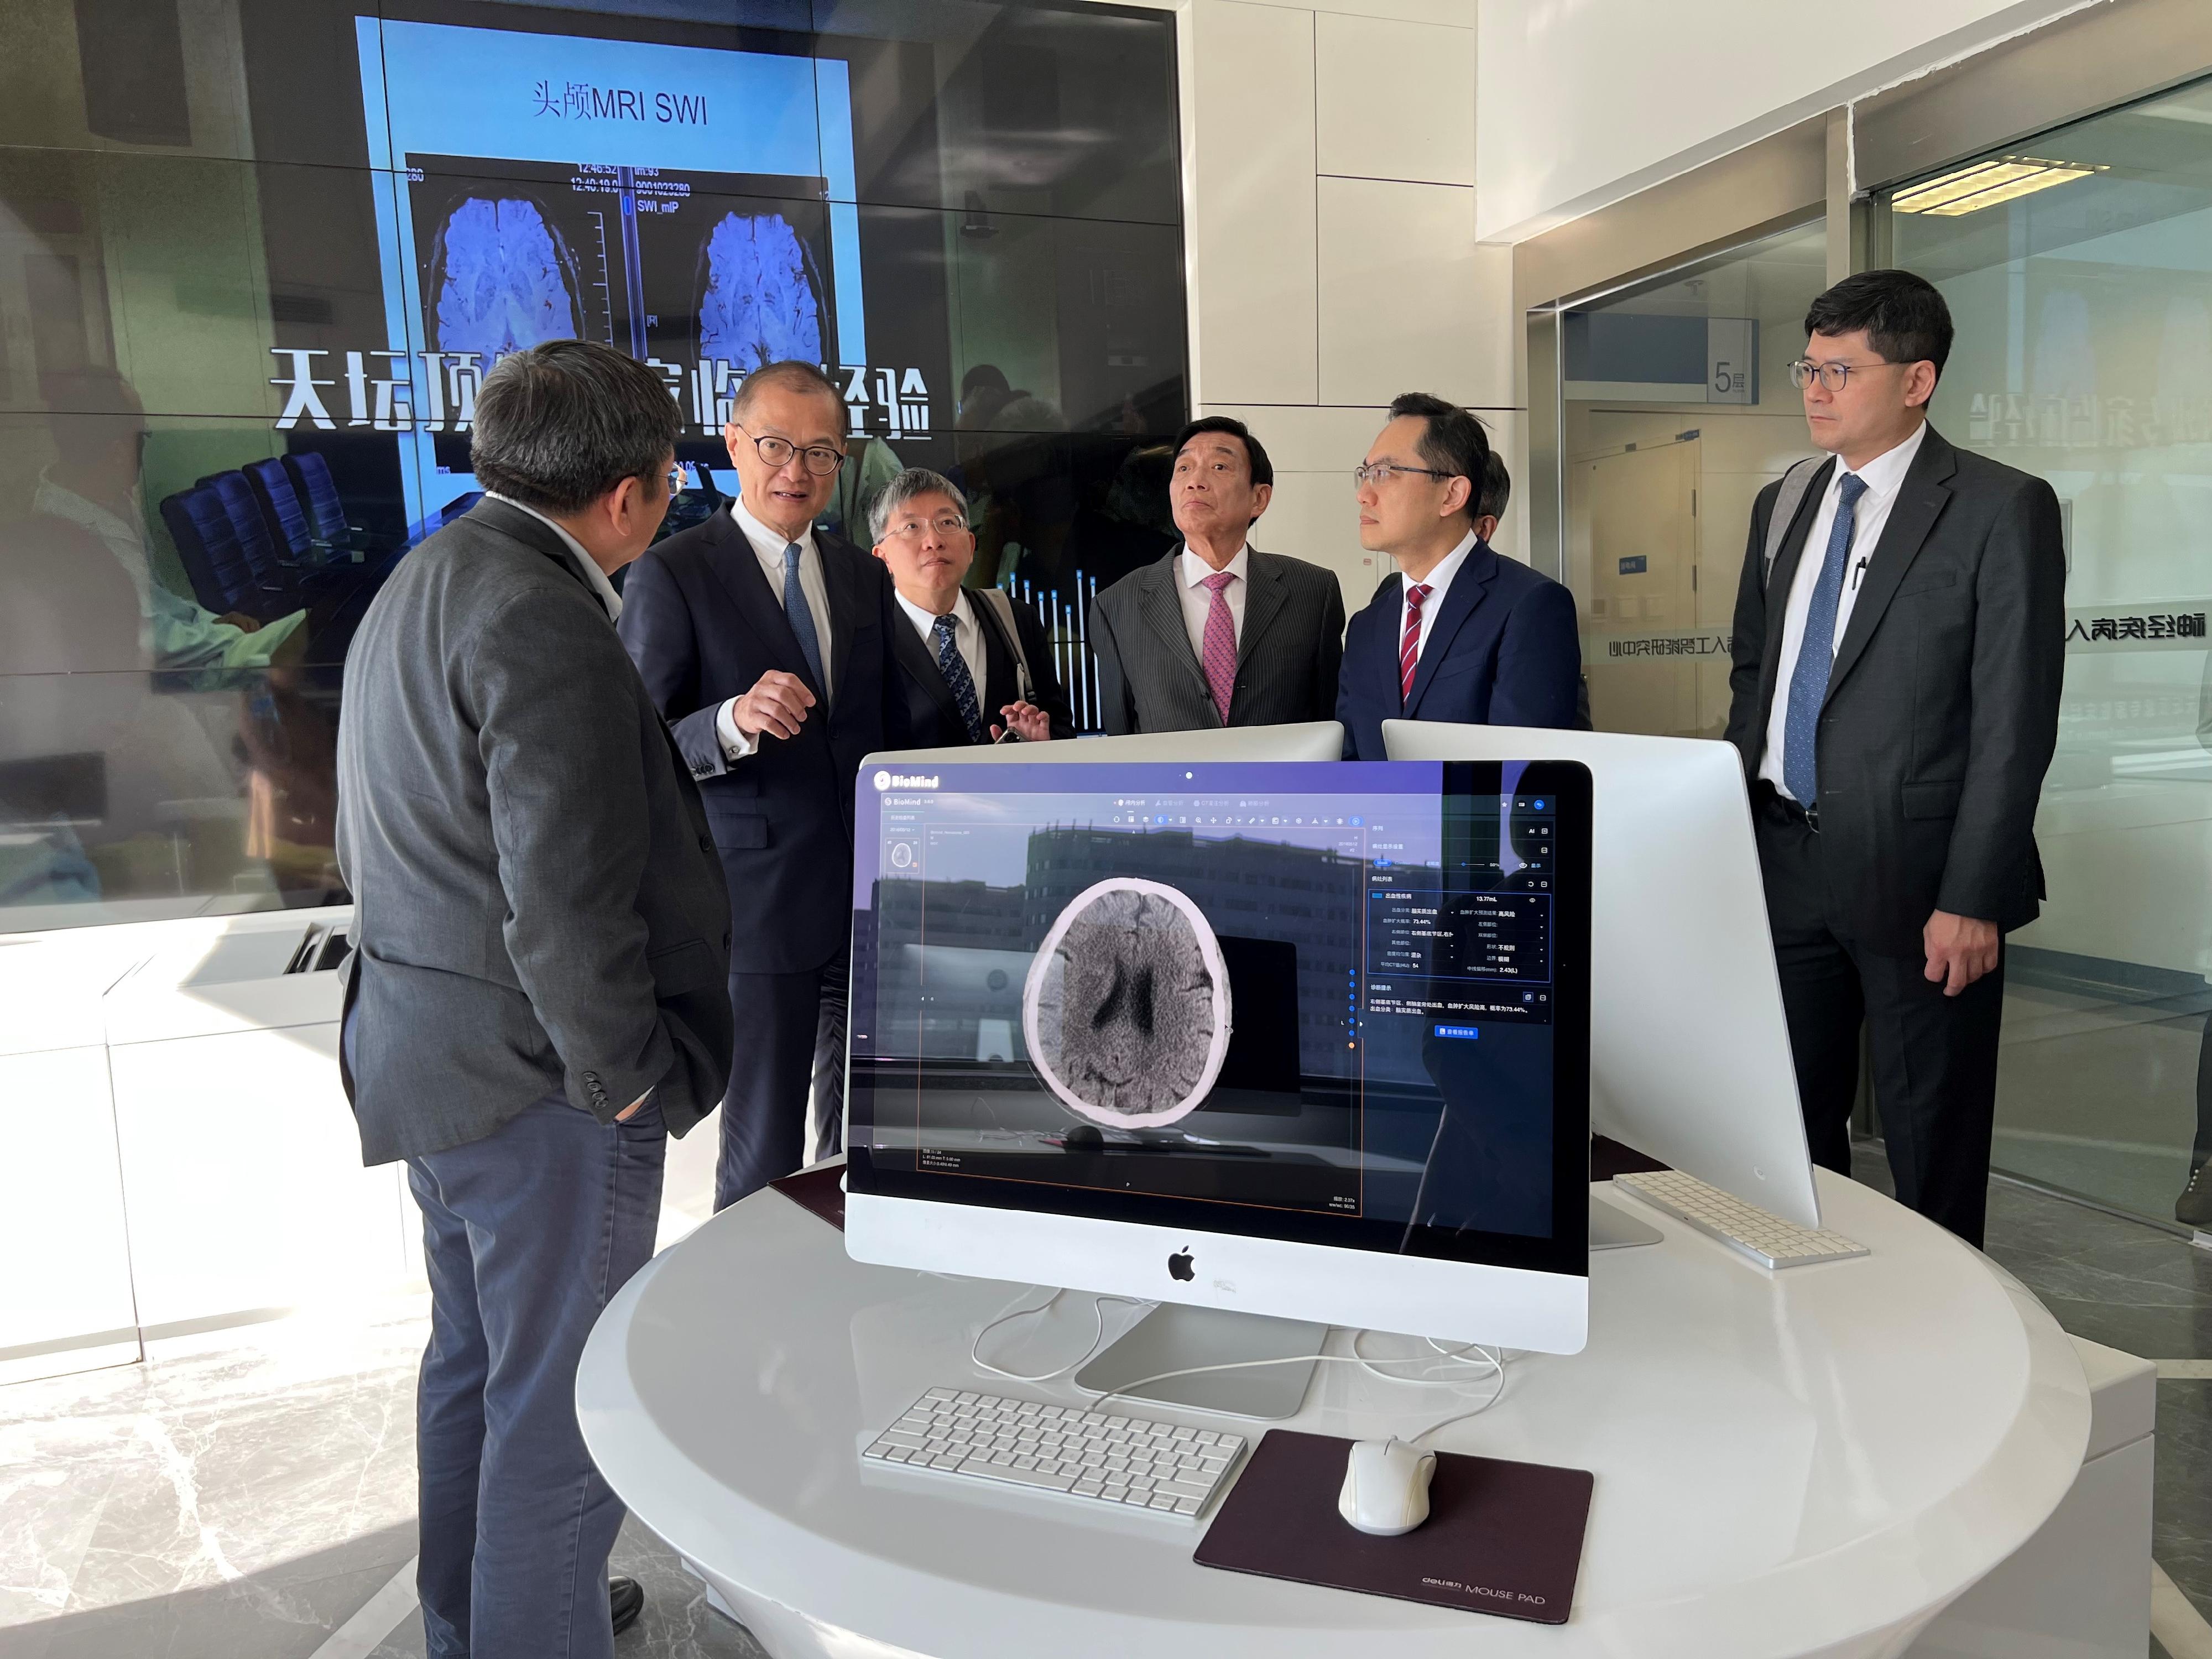 The Secretary for Health, Professor Lo Chung-mau (second left), visited Beijing Tiantan Hospital affiliated to Capital Medical University this morning (November 6) and learned about the operation of the CNCRC-Hanalytics Artificial Intelligence Research Centre for Neurological Disorders located at the hospital. Next to him are the Permanent Secretary for Health, Mr Thomas Chan (third left); the Director of Health, Dr Ronald Lam (second right); the Chairman of the Hospital Authority (HA), Mr Henry Fan (third right); and the Chief Executive of the HA, Dr Tony Ko (first right).